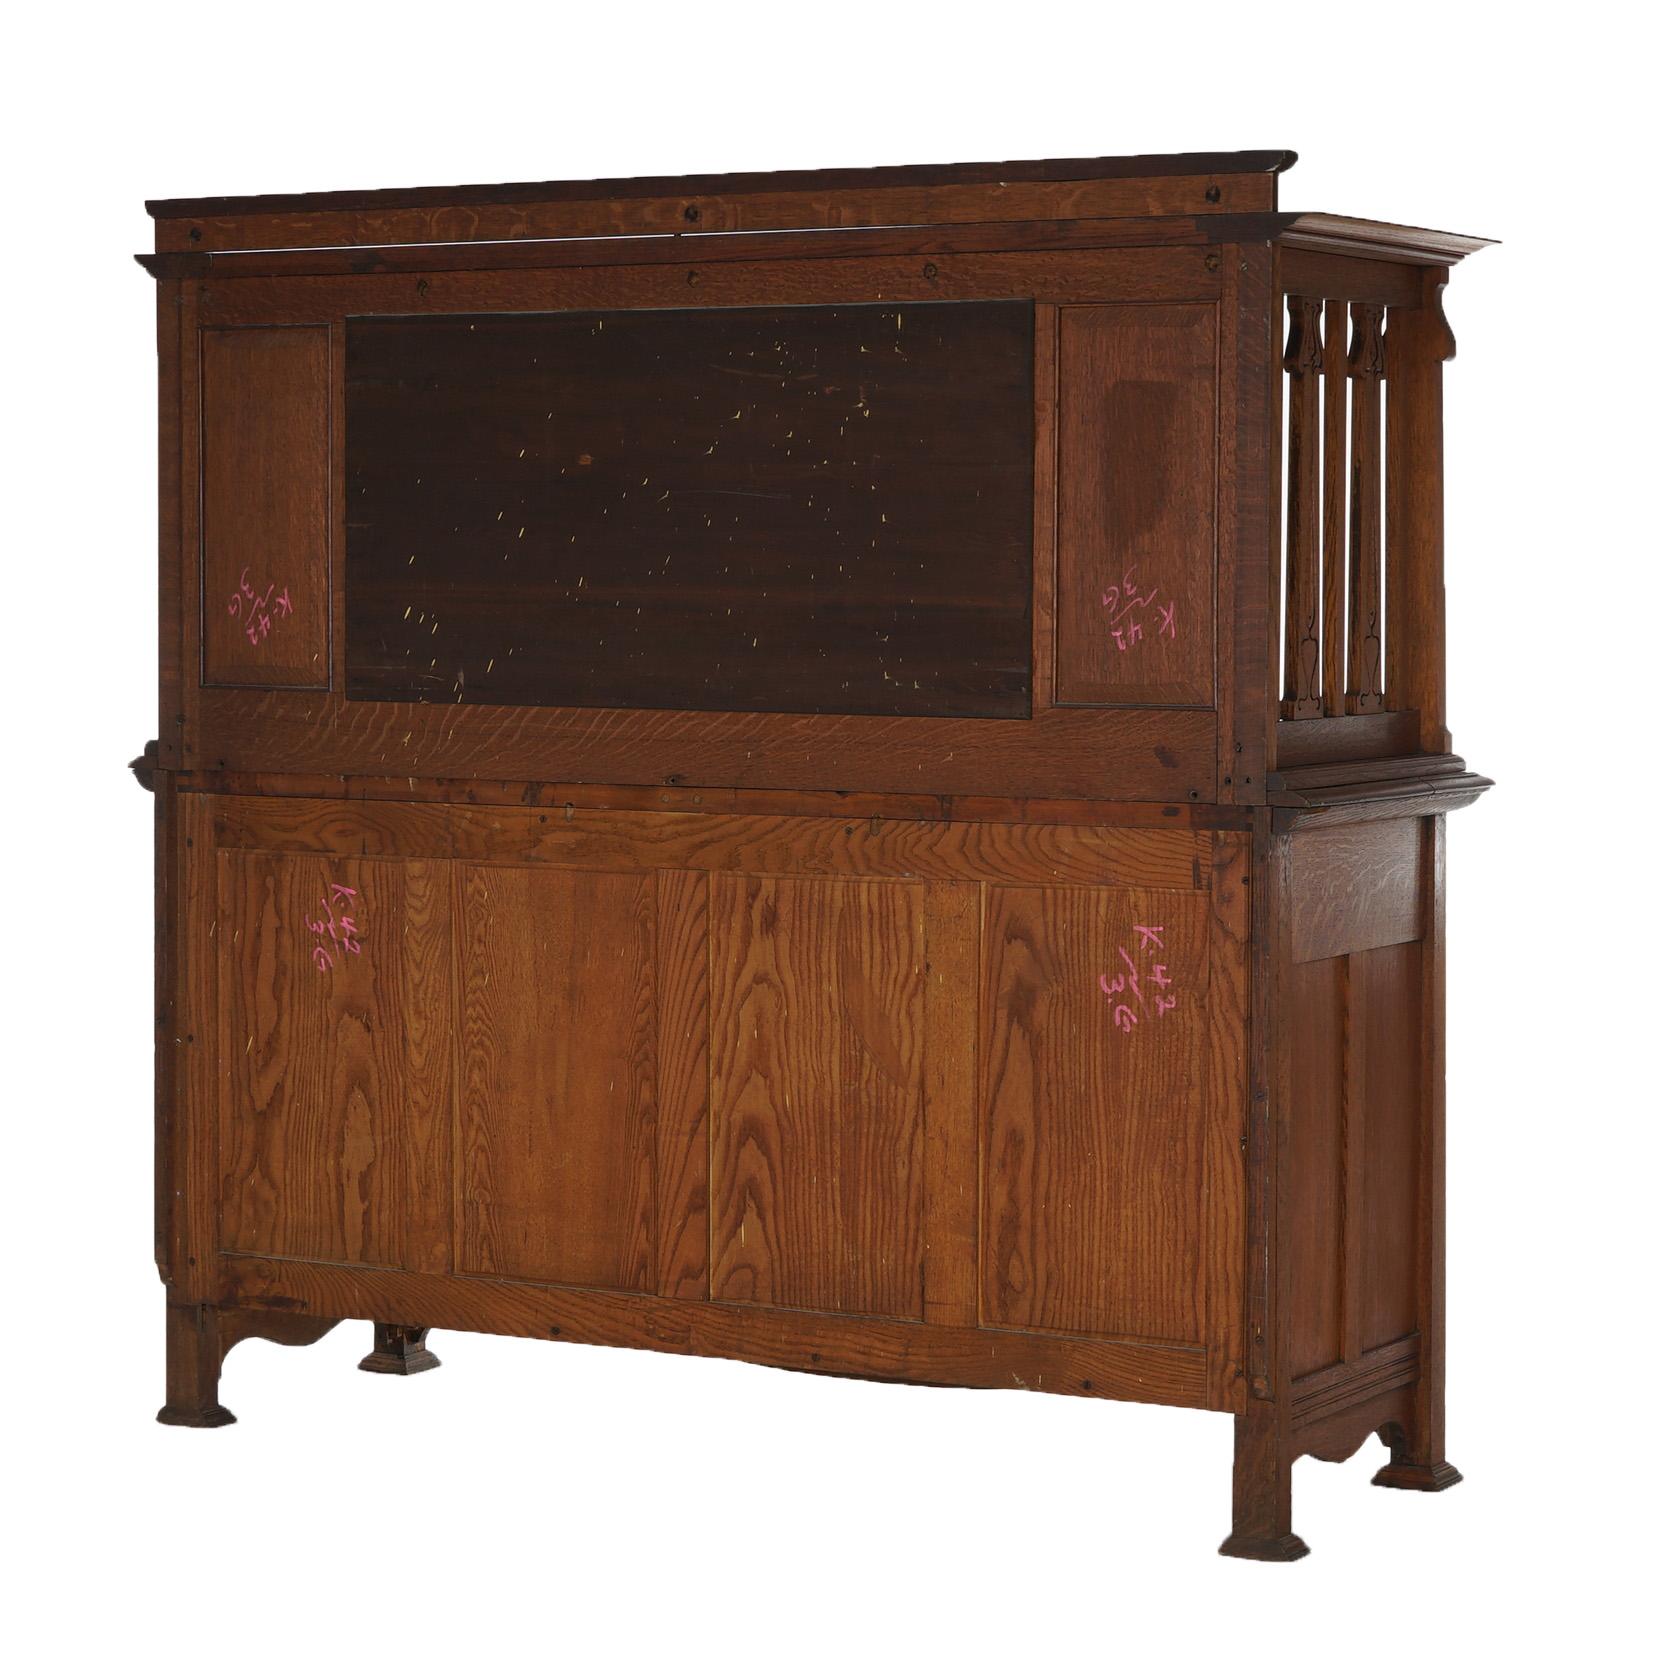 Antique English Arts & Crafts Liberty & Co. Oak Sideboard With Mirror C1910 For Sale 9